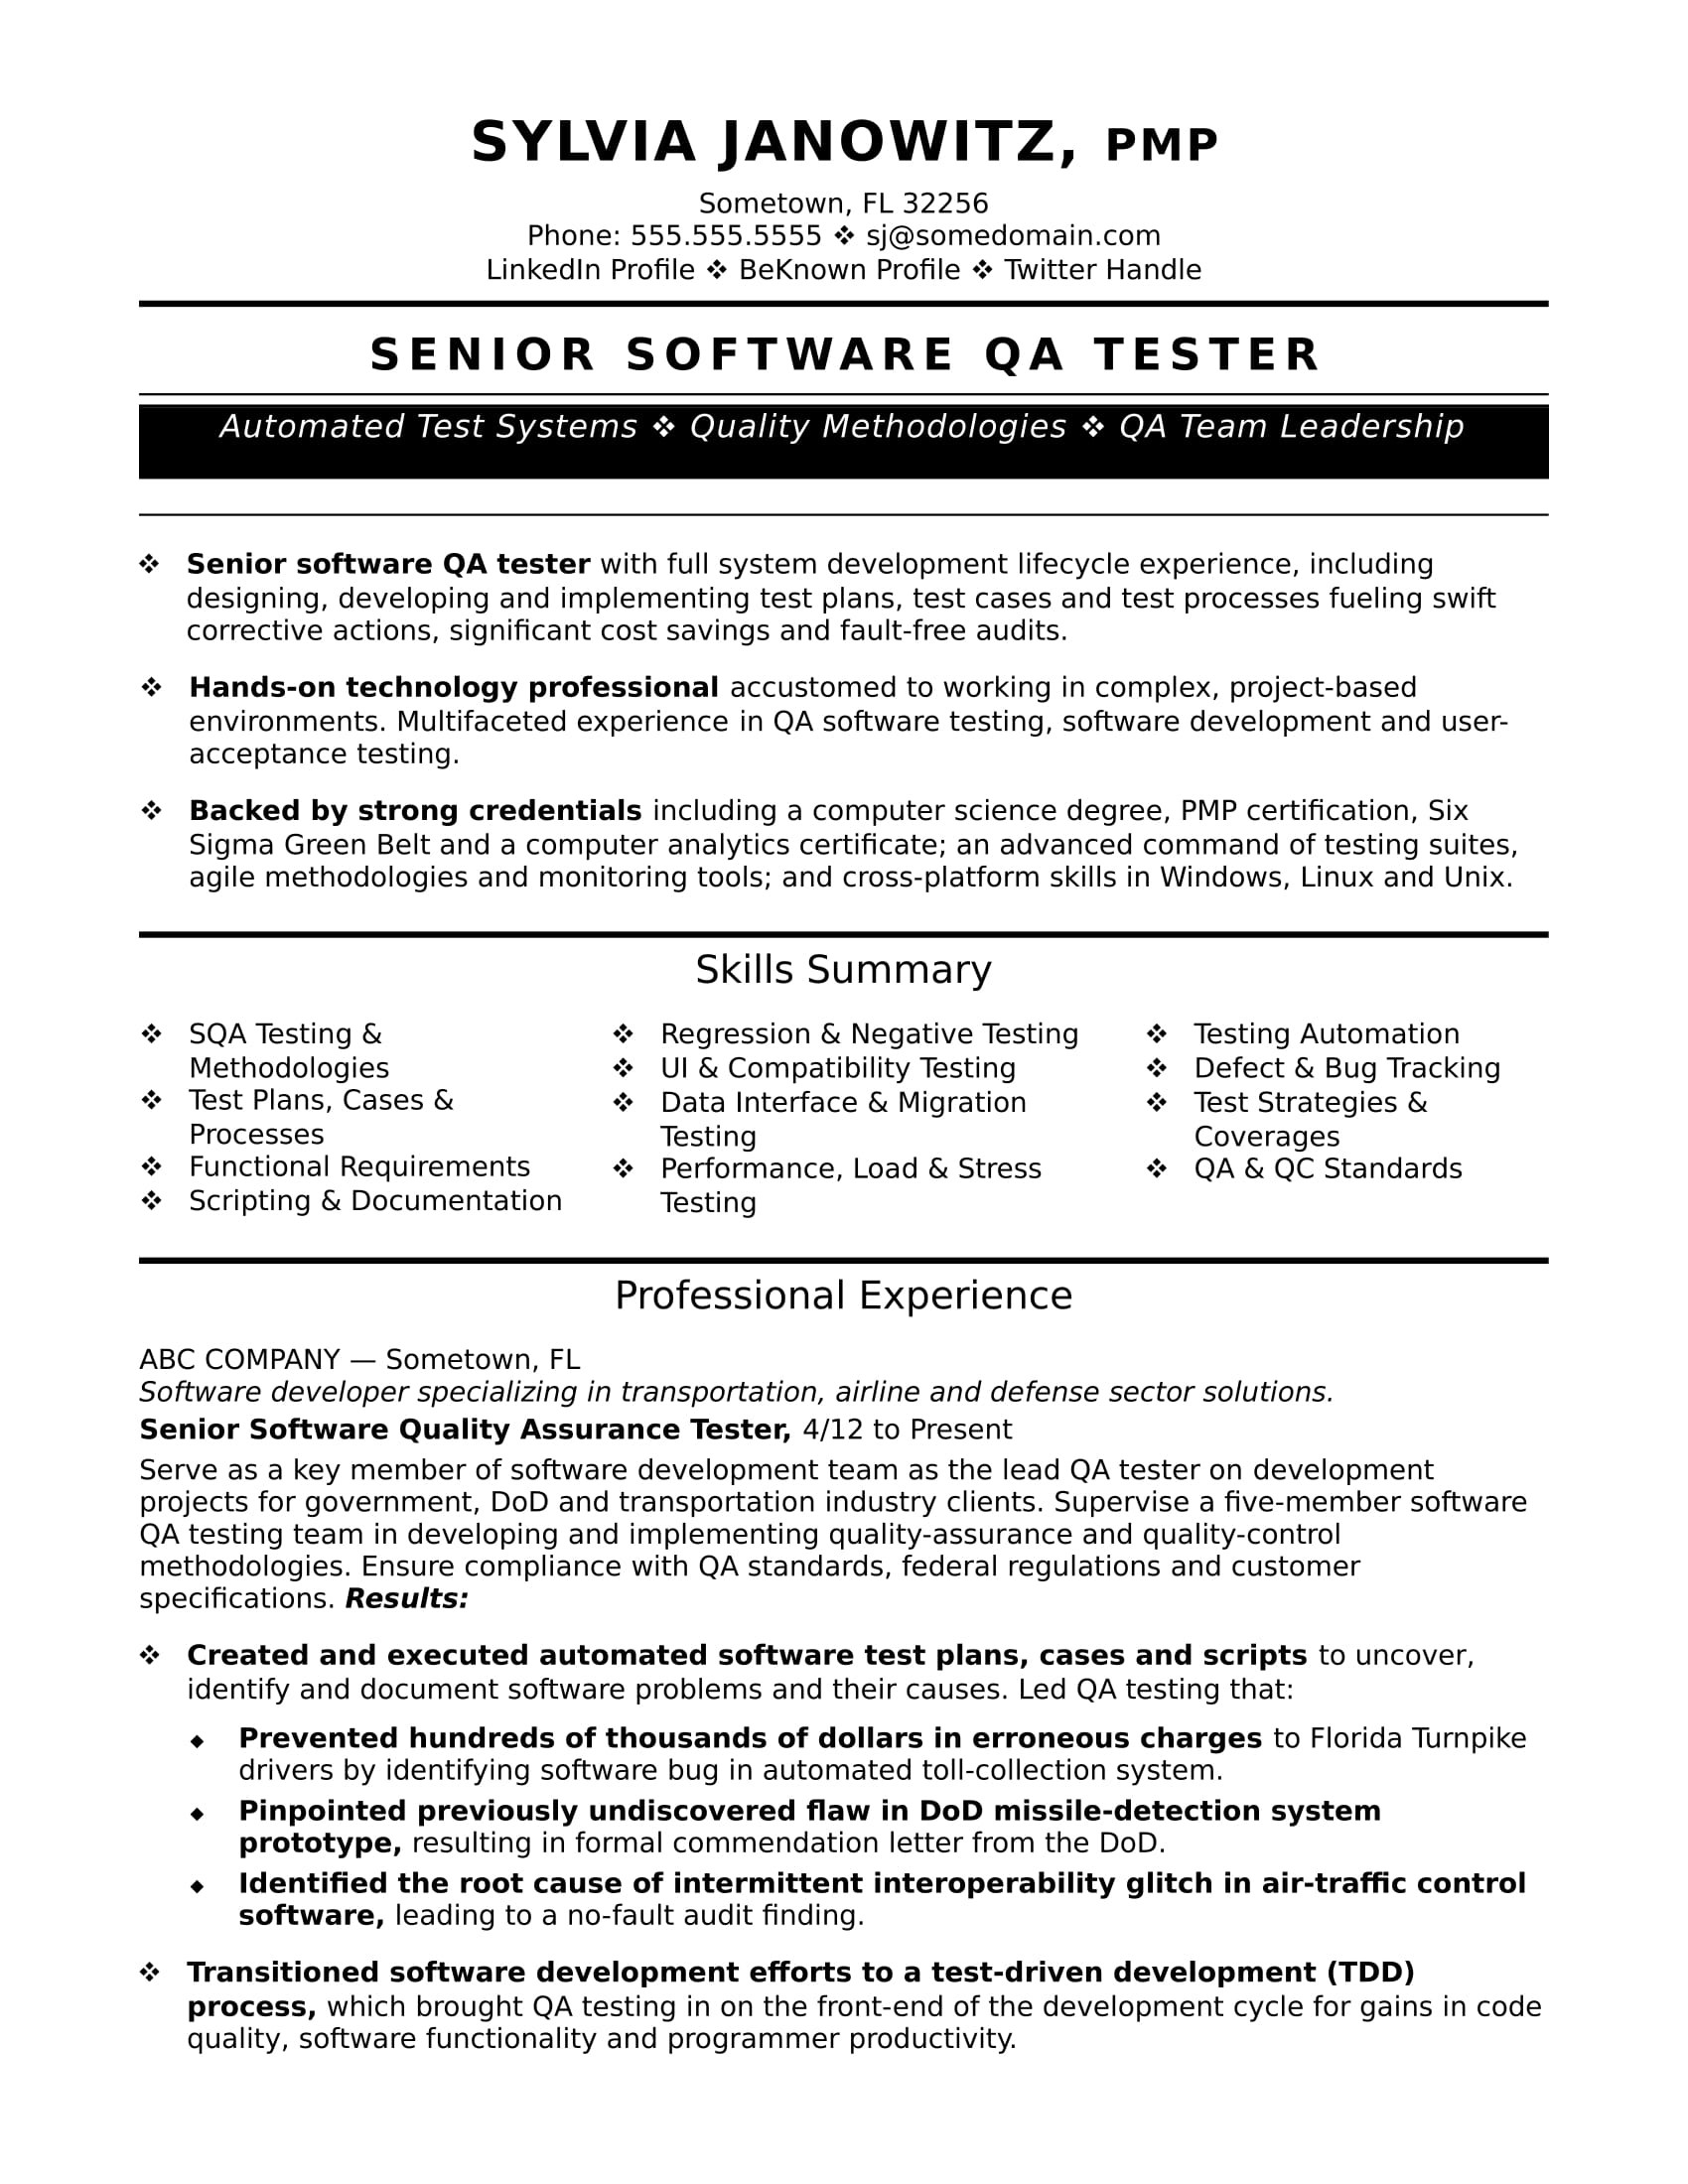 Sample Resumes for Qa Analyst 3 Years Experiene Experienced Qa software Tester Resume Sample Monster.com